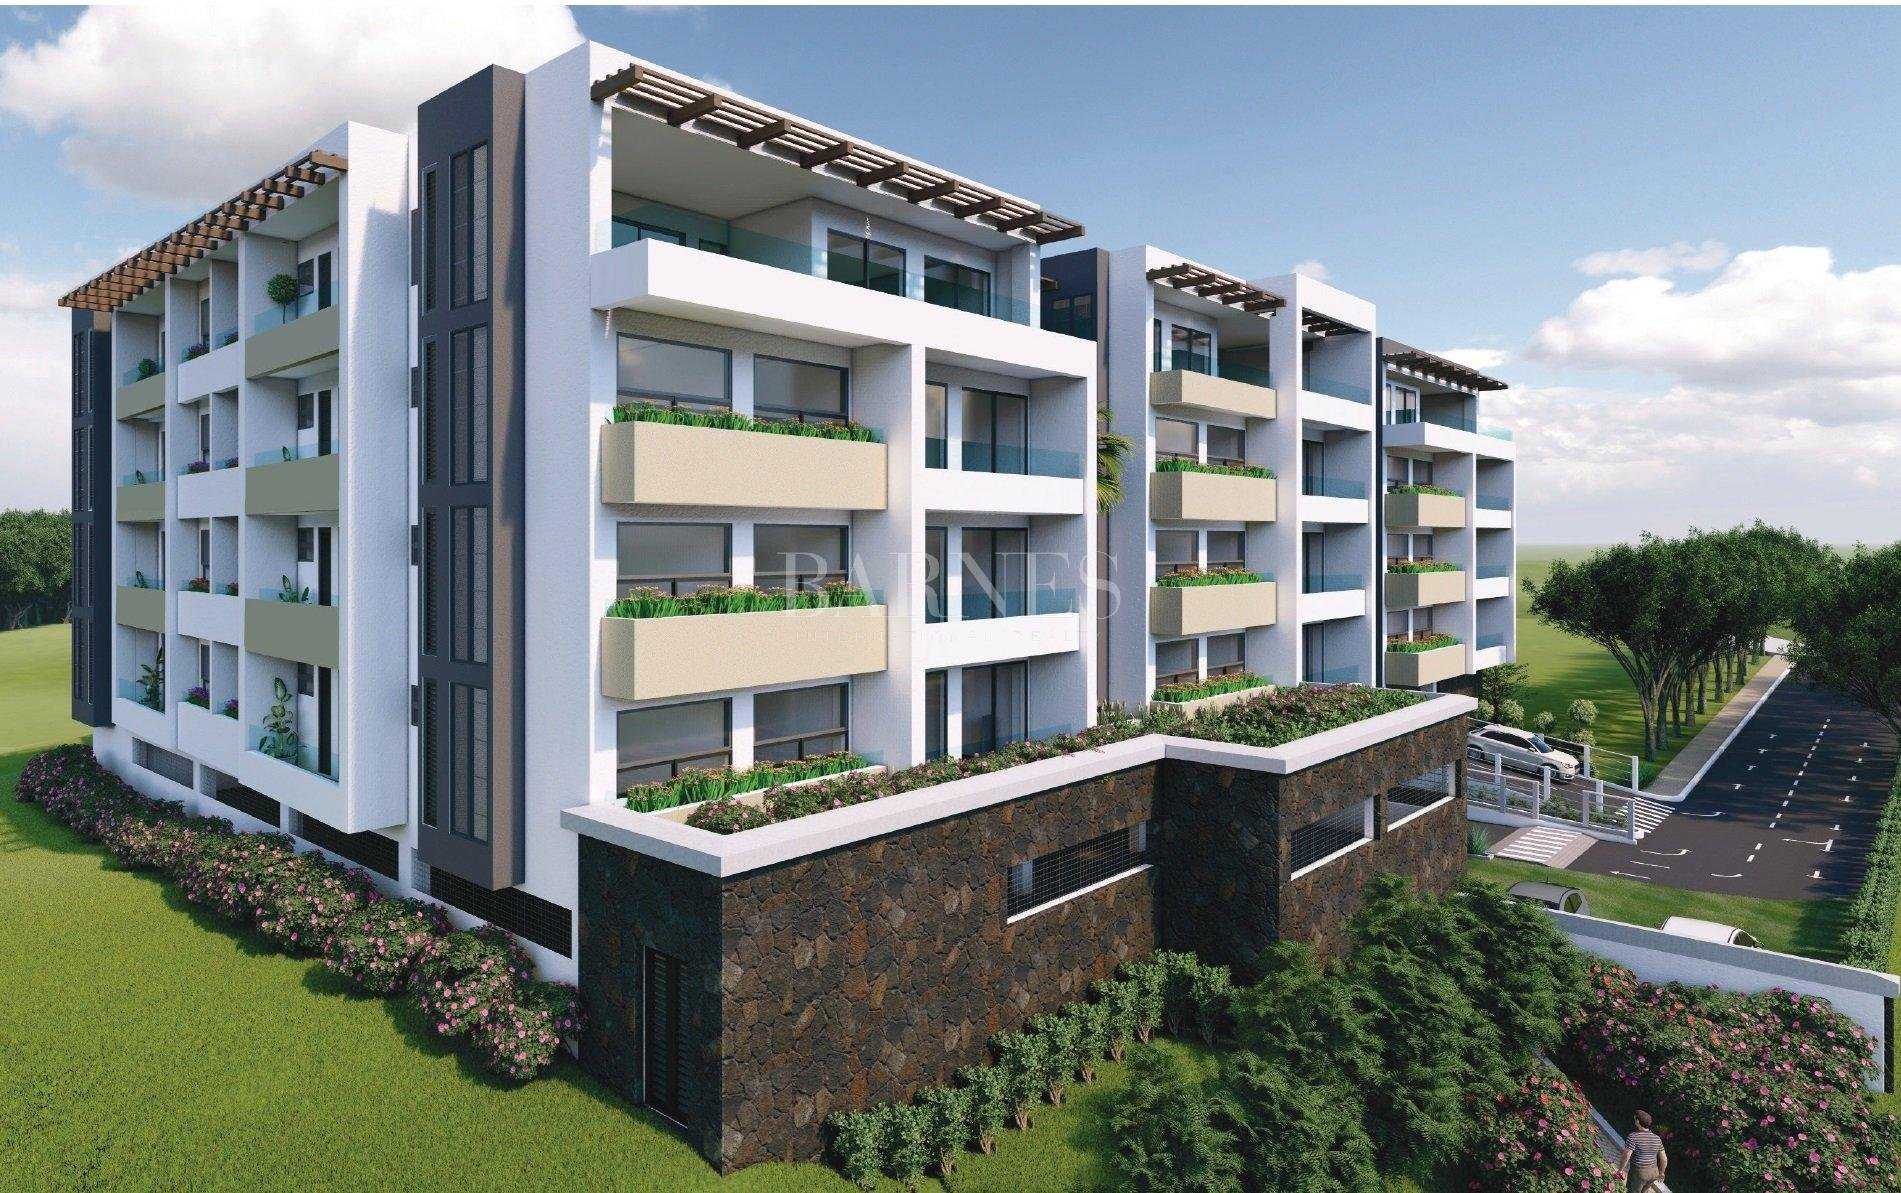 BAGATELLE - Apartments with mountain view - 3 bedrooms Moka  -  ref 6766062 (picture 1)